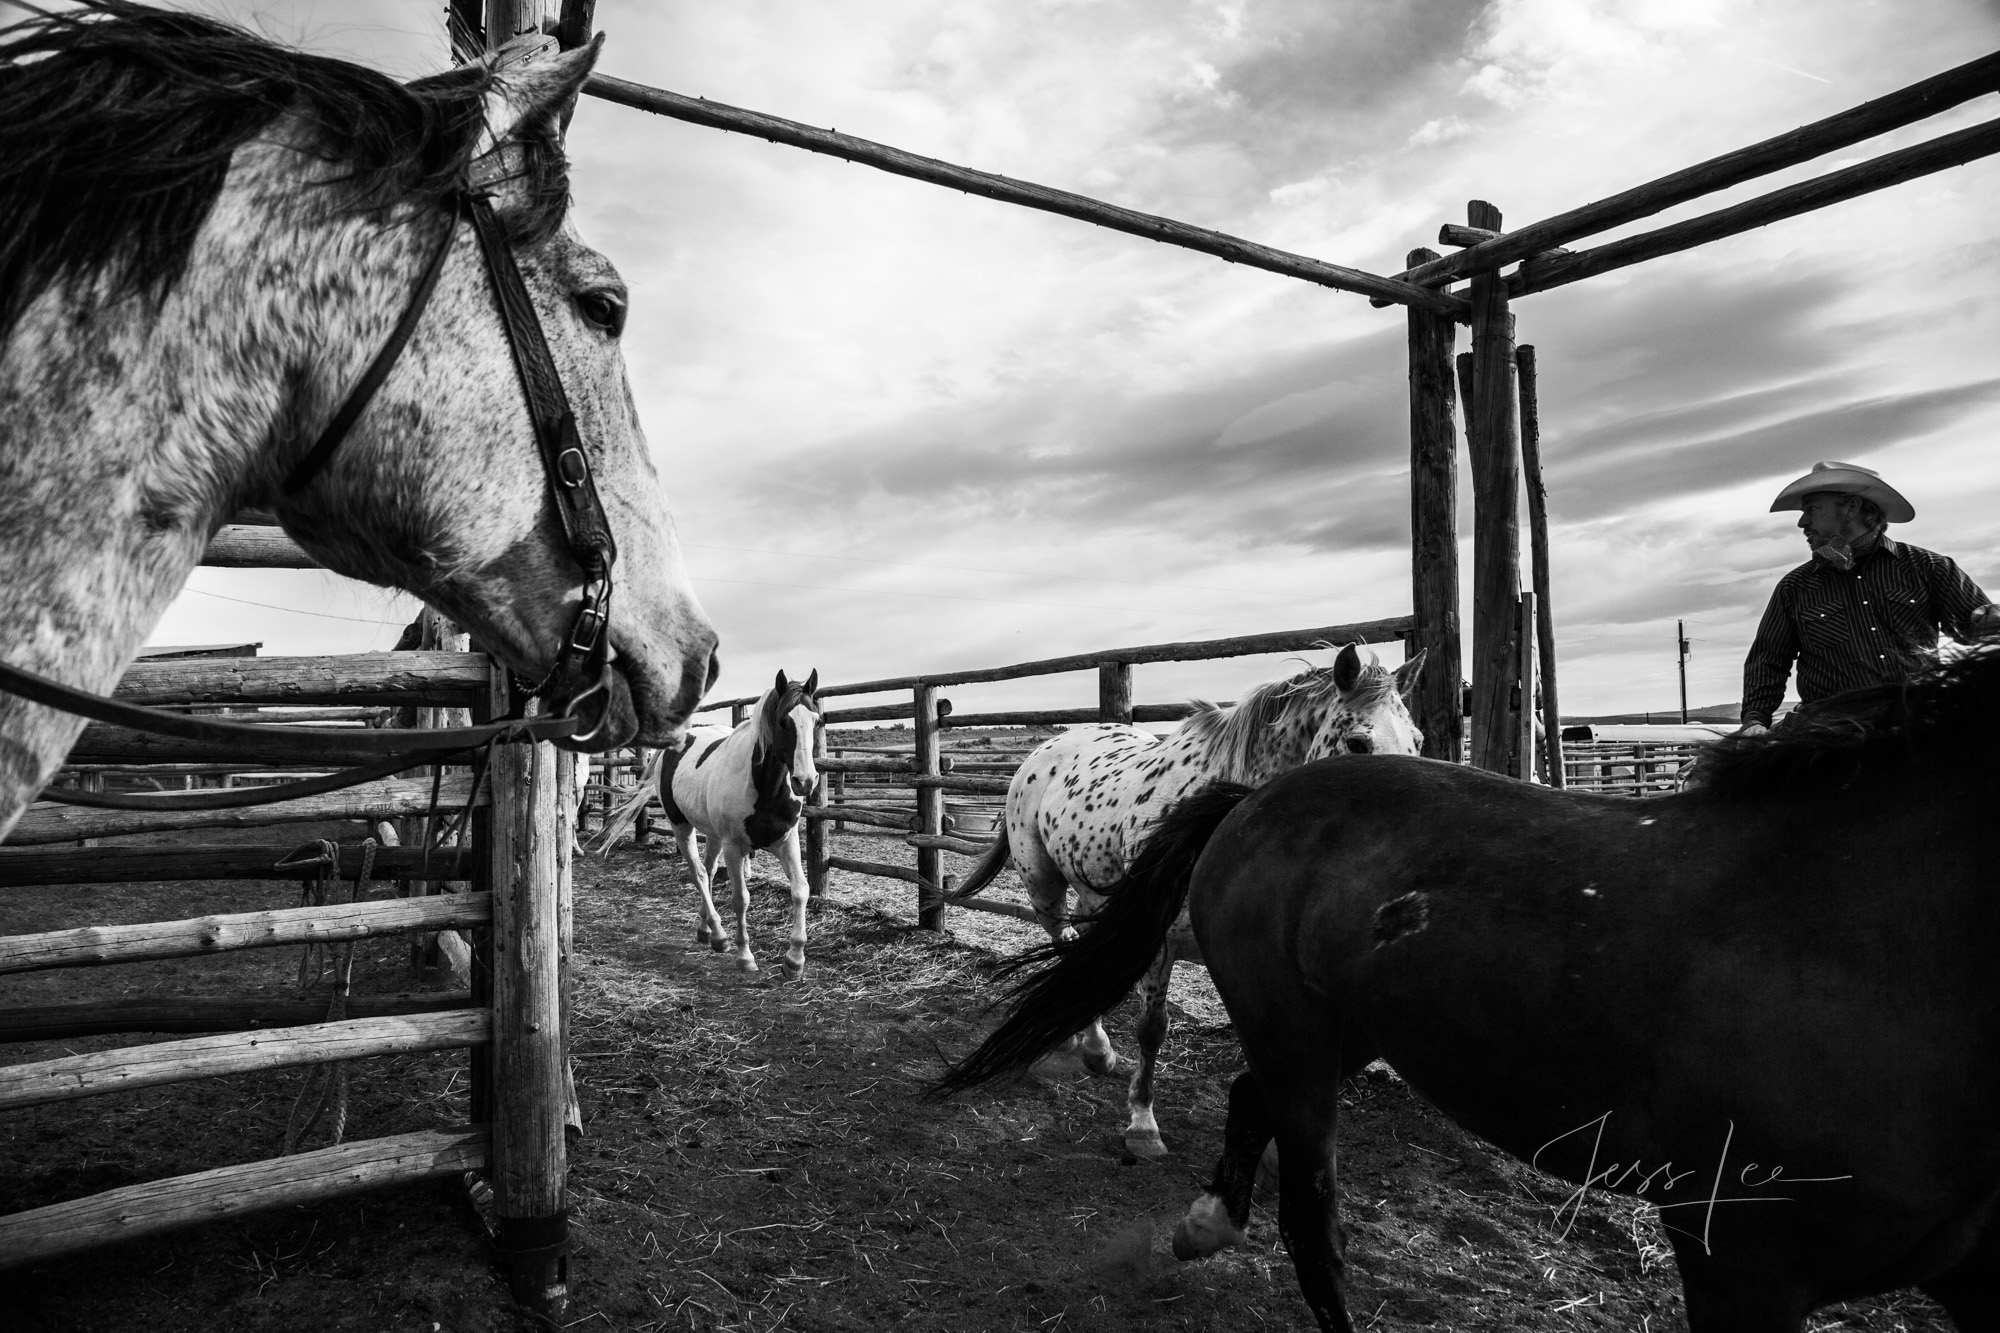 Fine Art Limited Edition Photo Prints of Cowboys, Horses, and life in the West.  Cowboy pictures in black and white. Blocker....